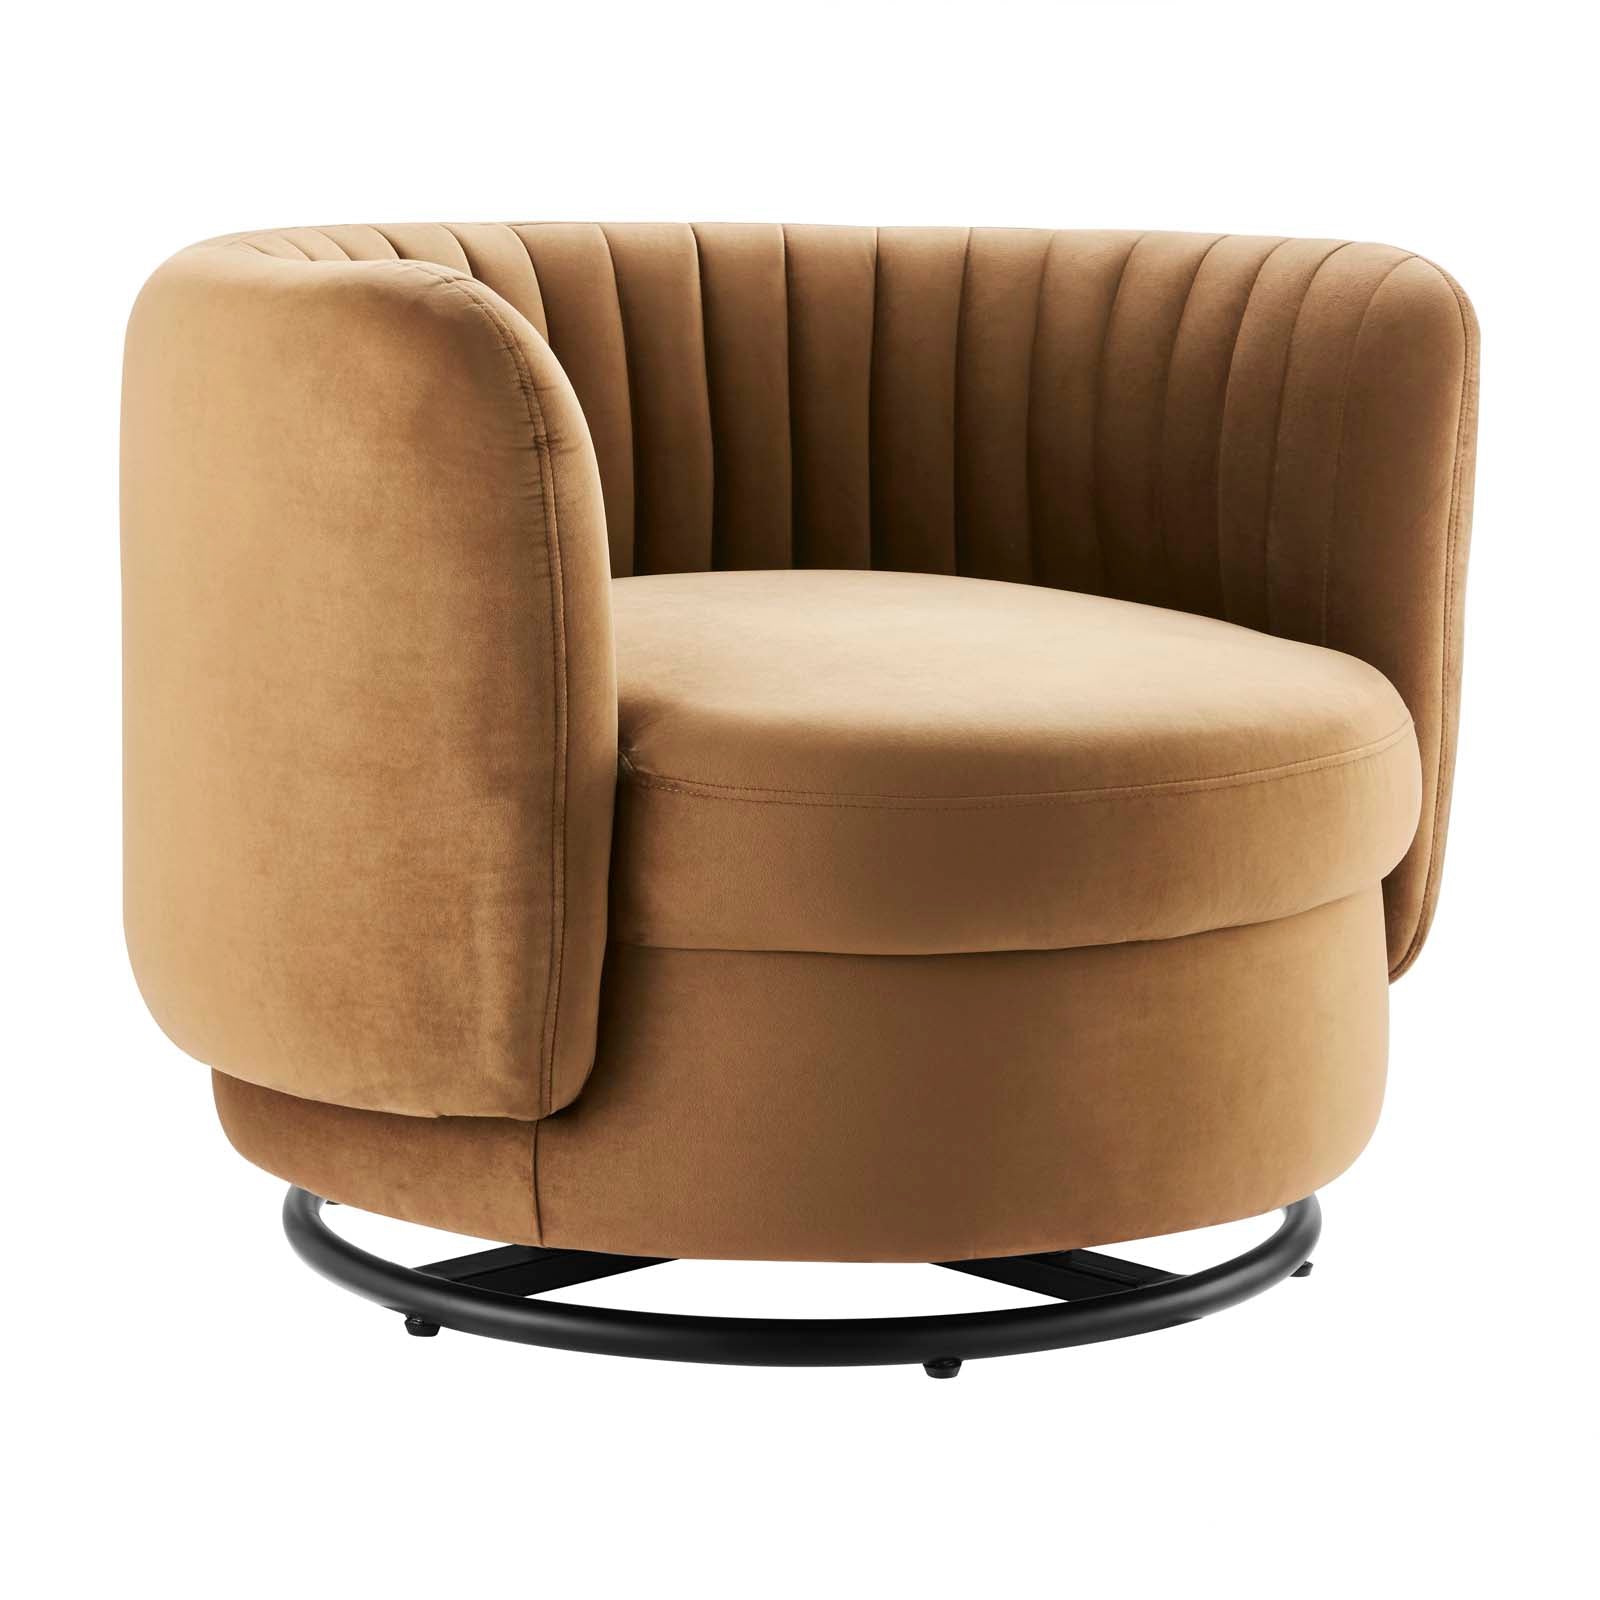 Modway Accent Chairs - Embrace Tufted Performance Velvet Performance Velvet Swivel Chair Black Cognac